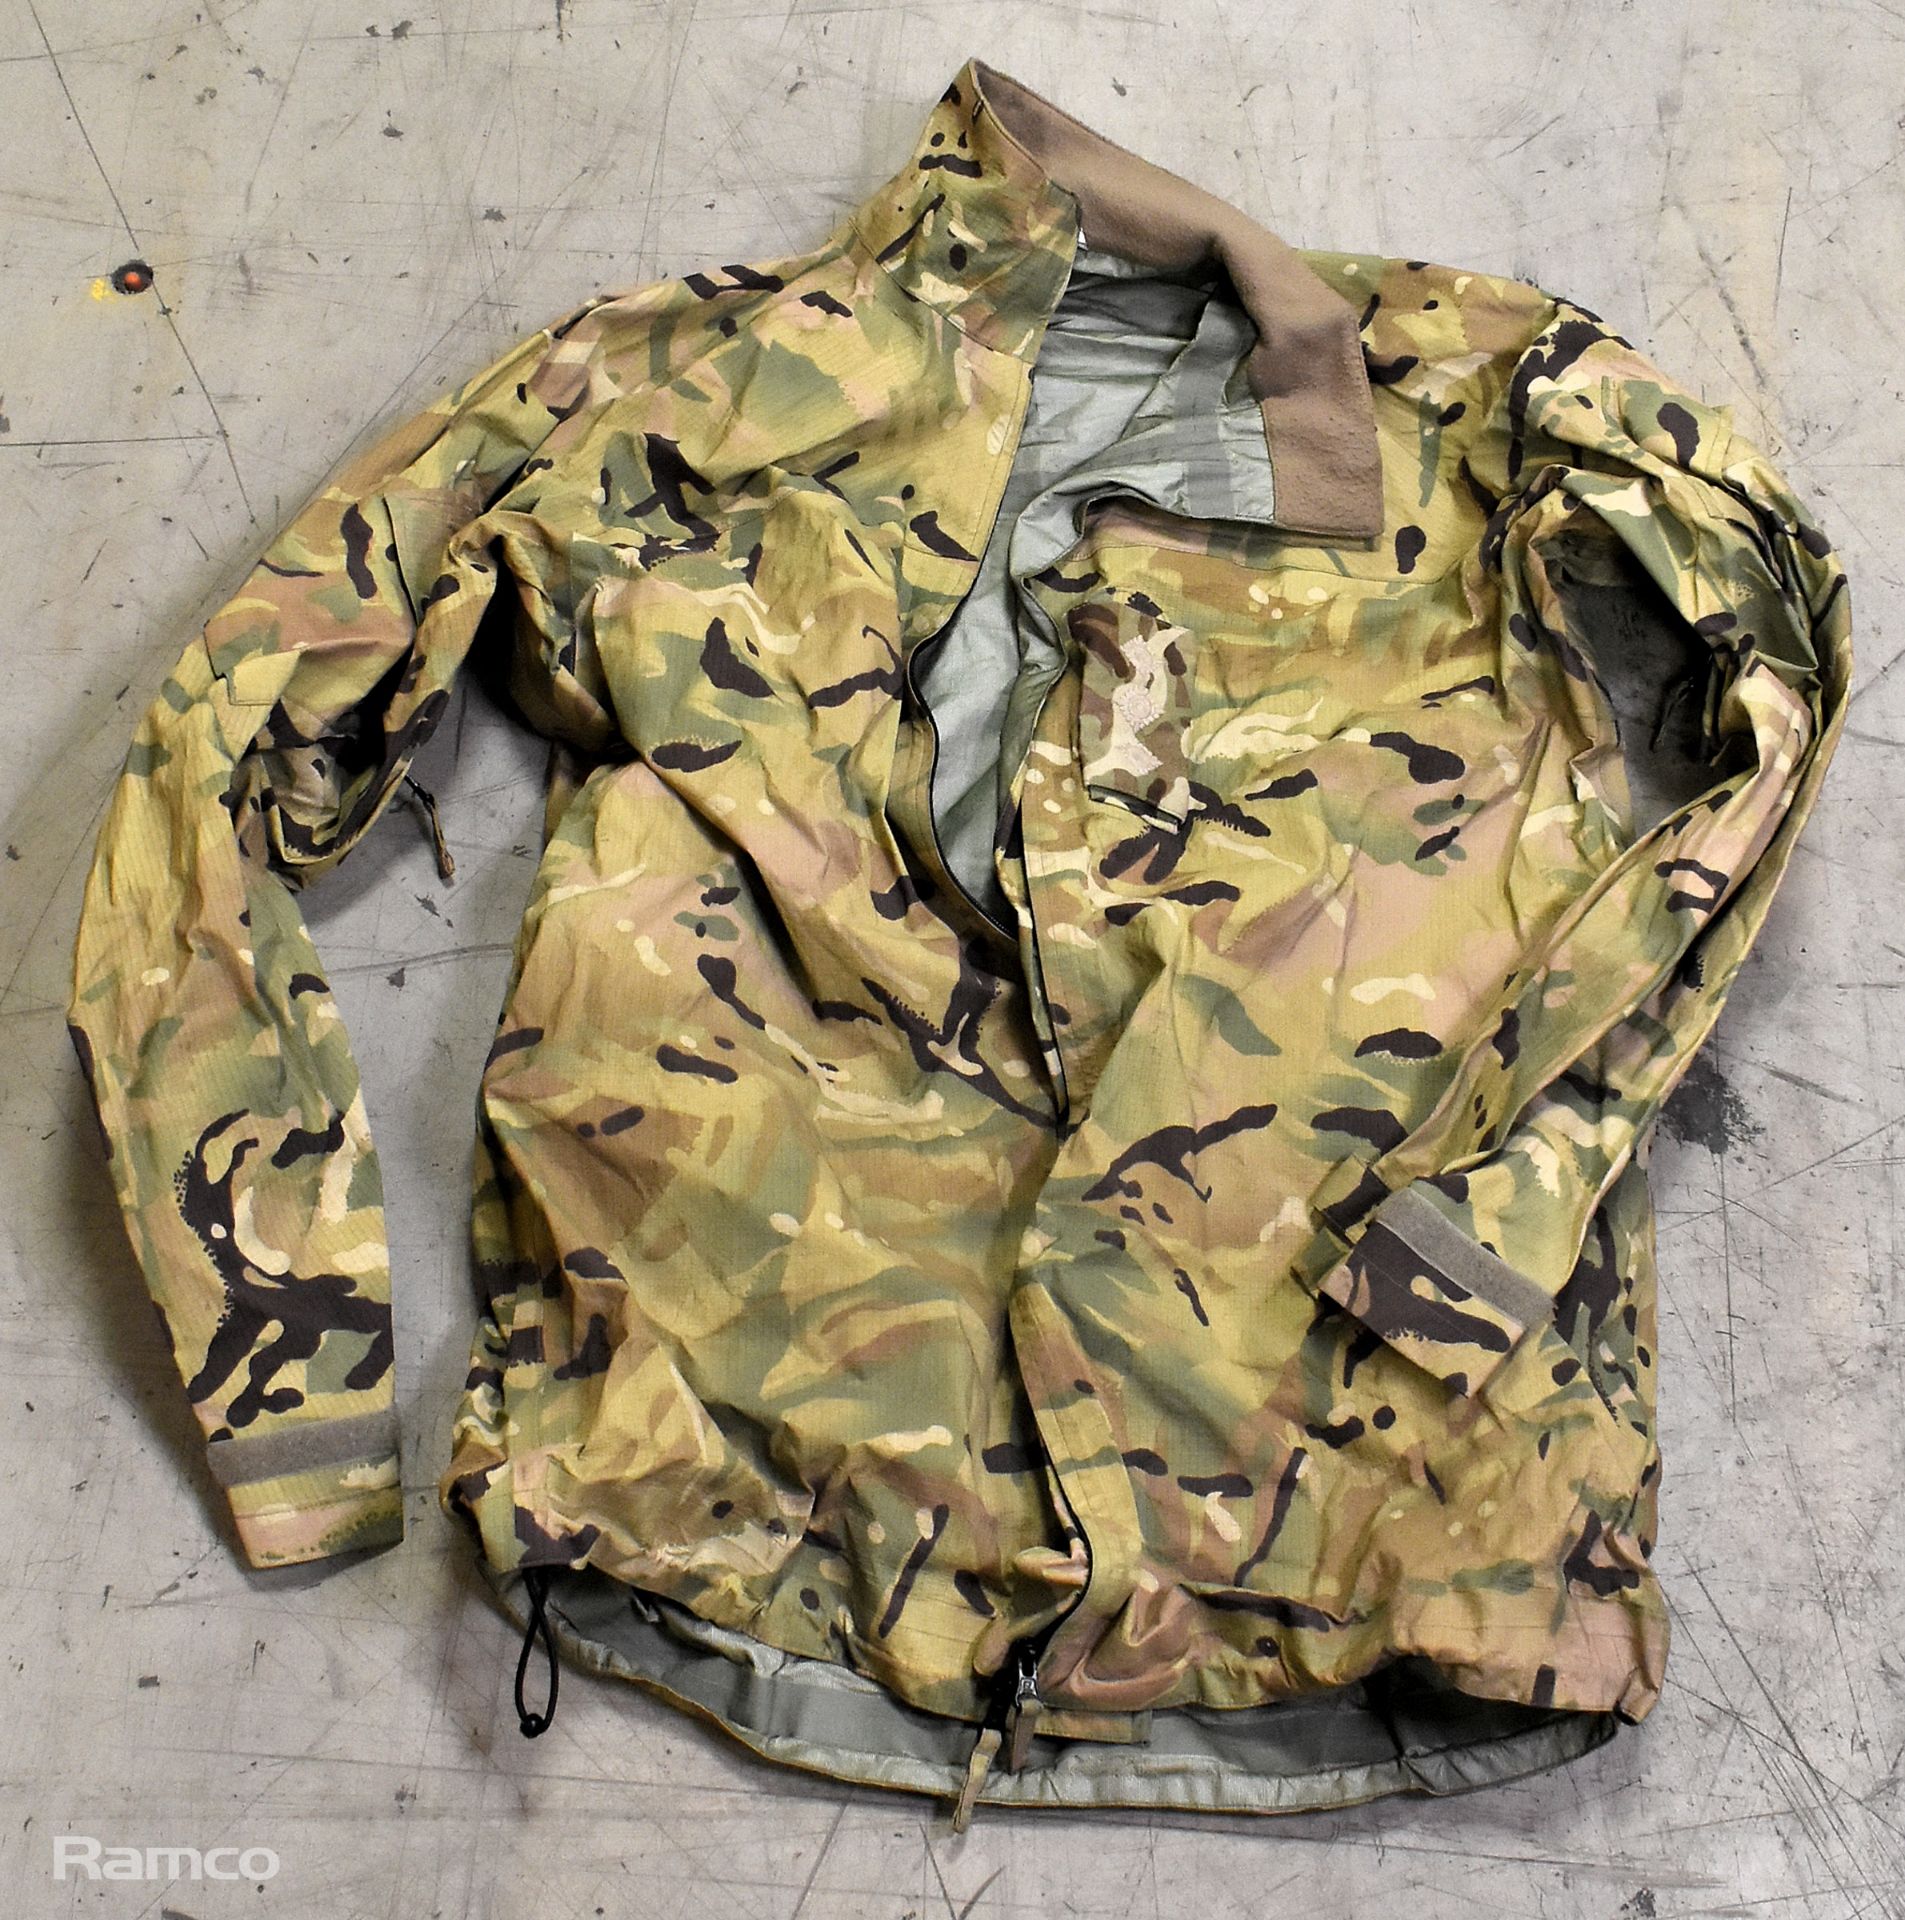 Various types of ex-military clothing - 145kg - Image 2 of 6